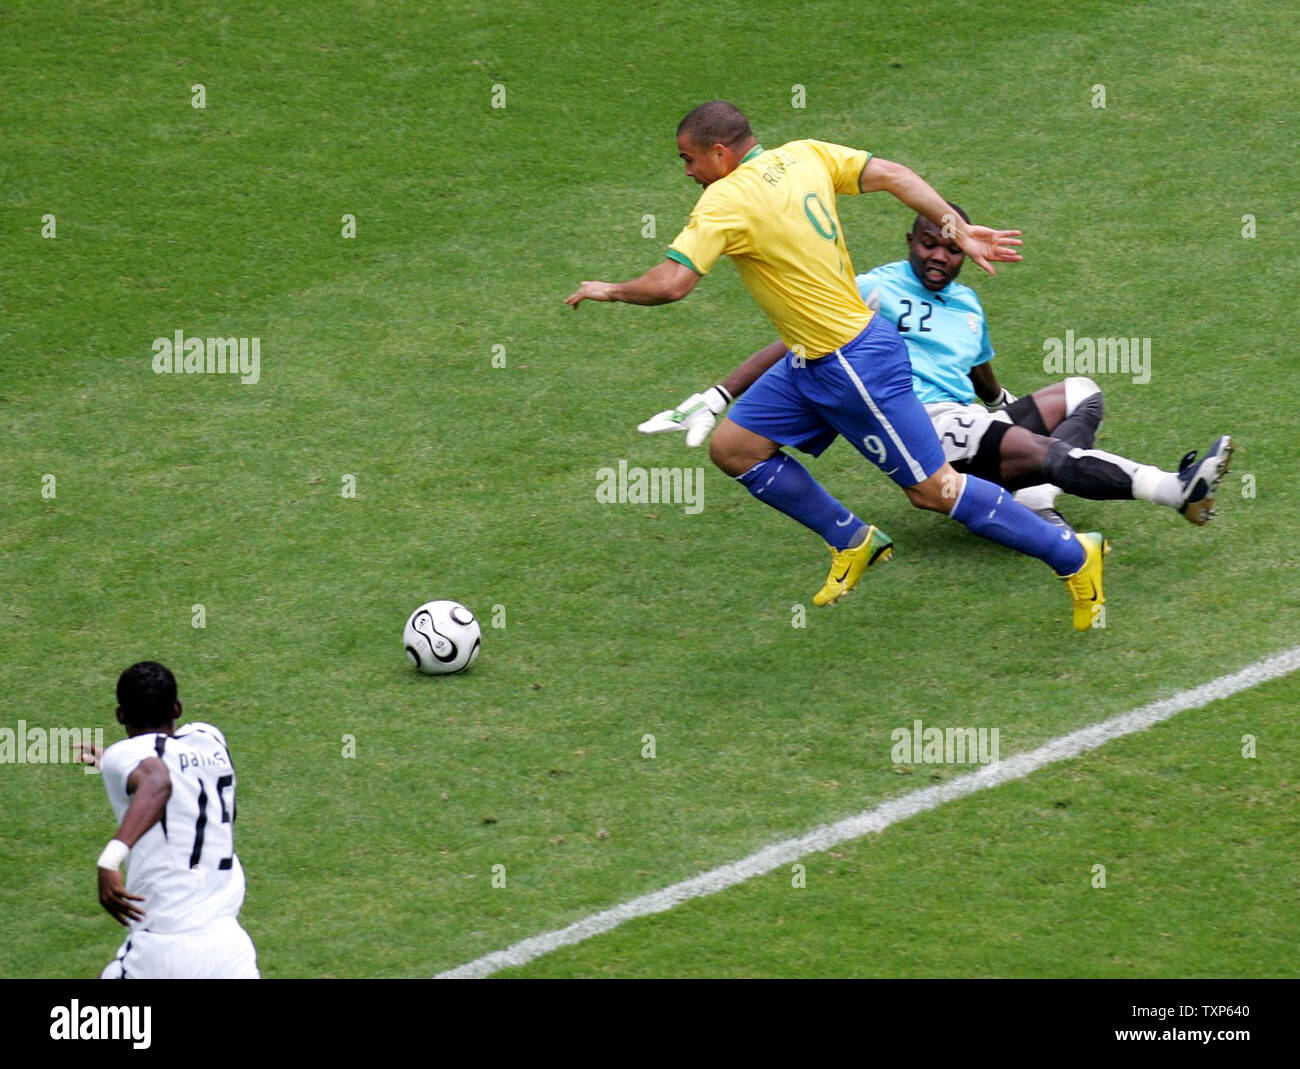 The first goal of the match after only five minutes is scored by Brazil's Ronaldo (yellow) as he moves the ball past Ghana's goalie in World Cup action in Dortmund, Germany on June 27, 2006.  Brazil beat Ghana 3-0.   (UPI Photo/Arthur Thill) Stock Photo